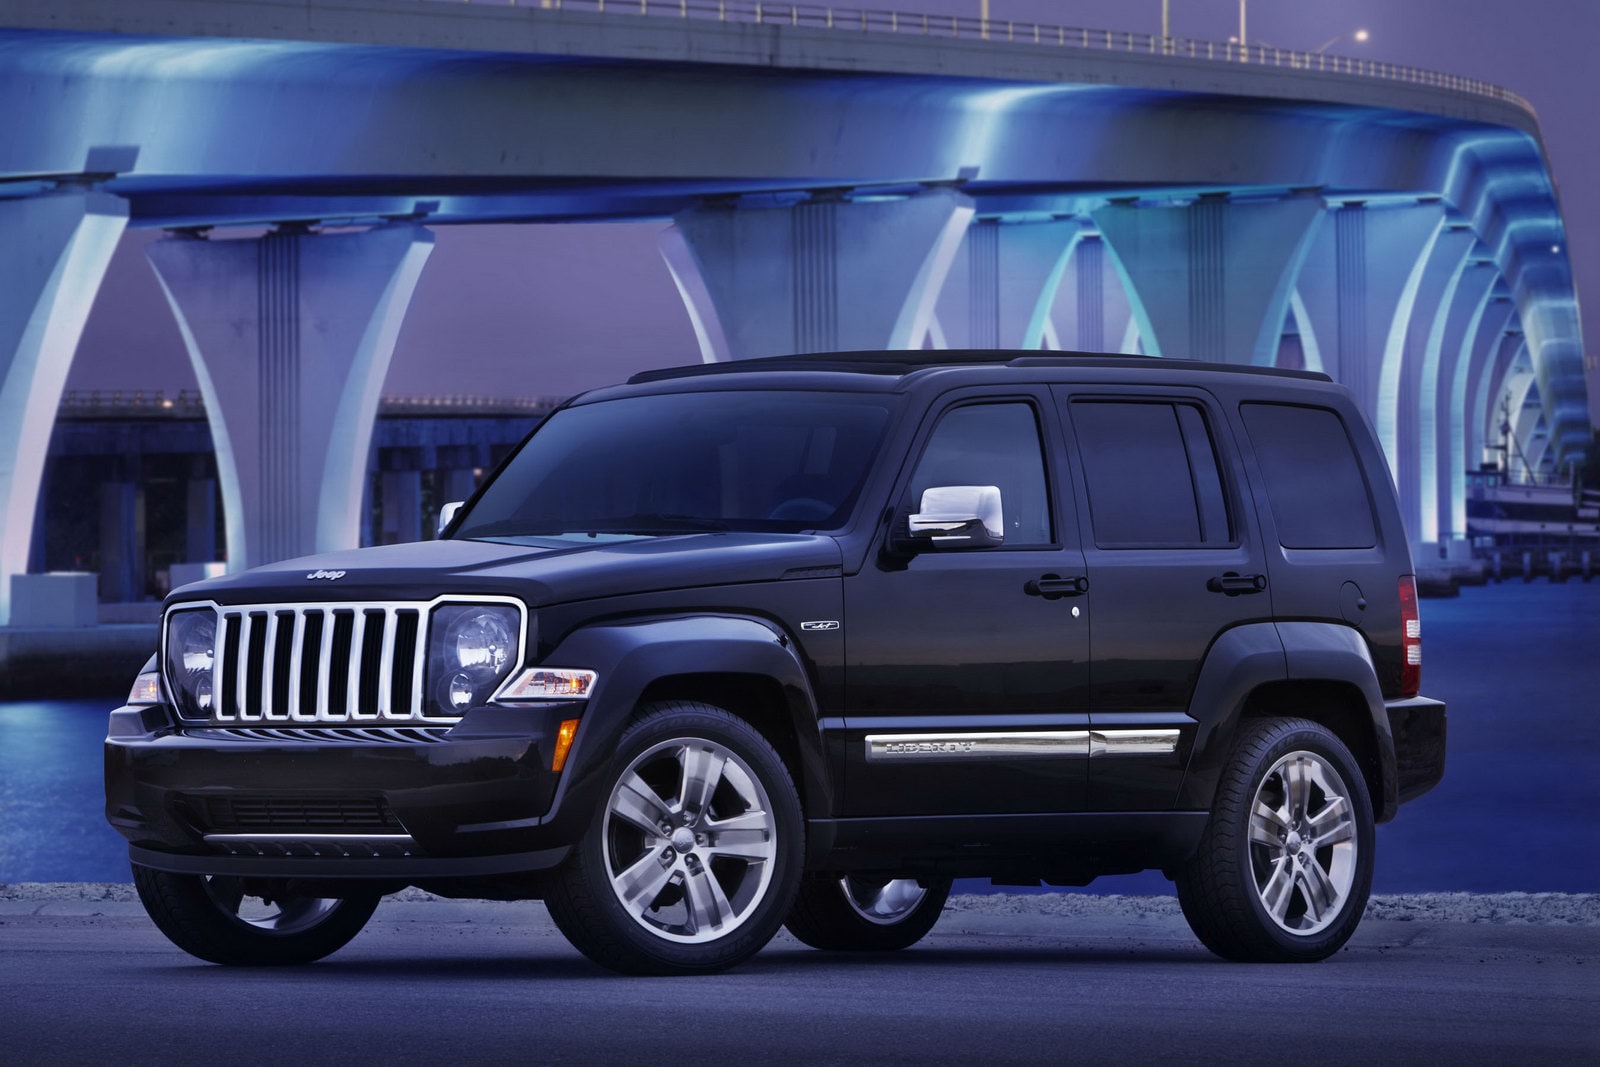 2011 Jeep liberty owner reviews #4